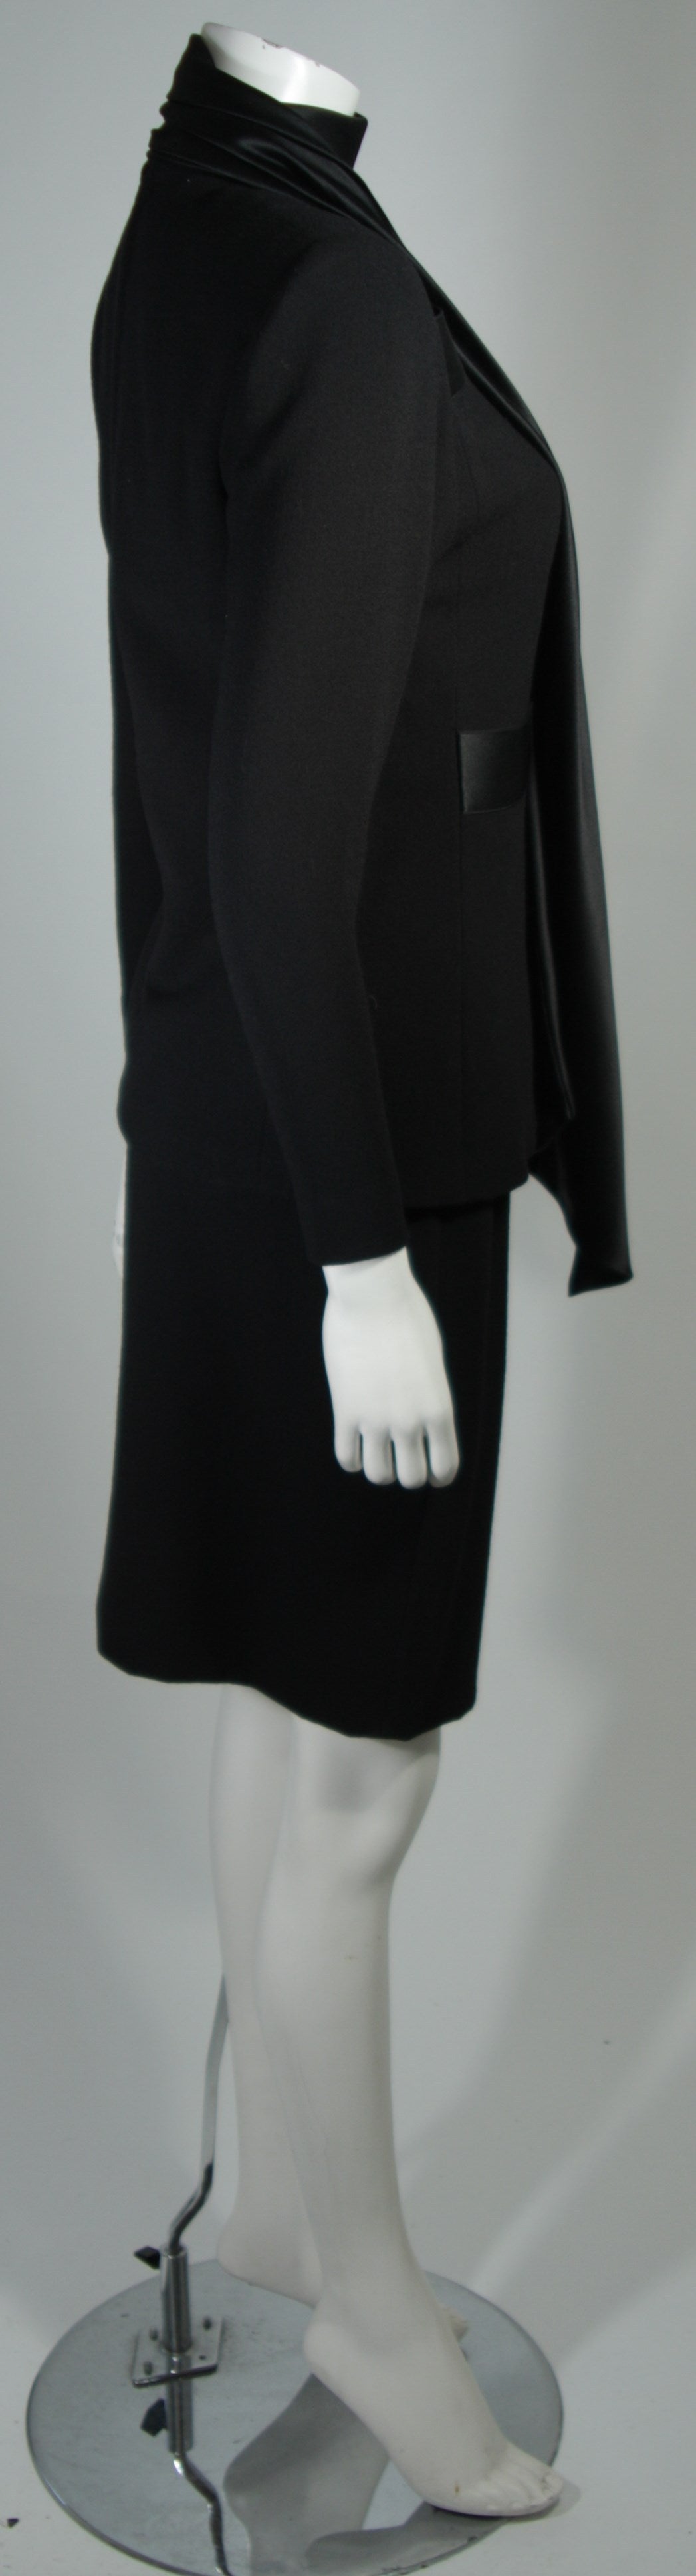 Galanos Couture Black Wool Skirt Suit with Silk Details Size 2 4 2